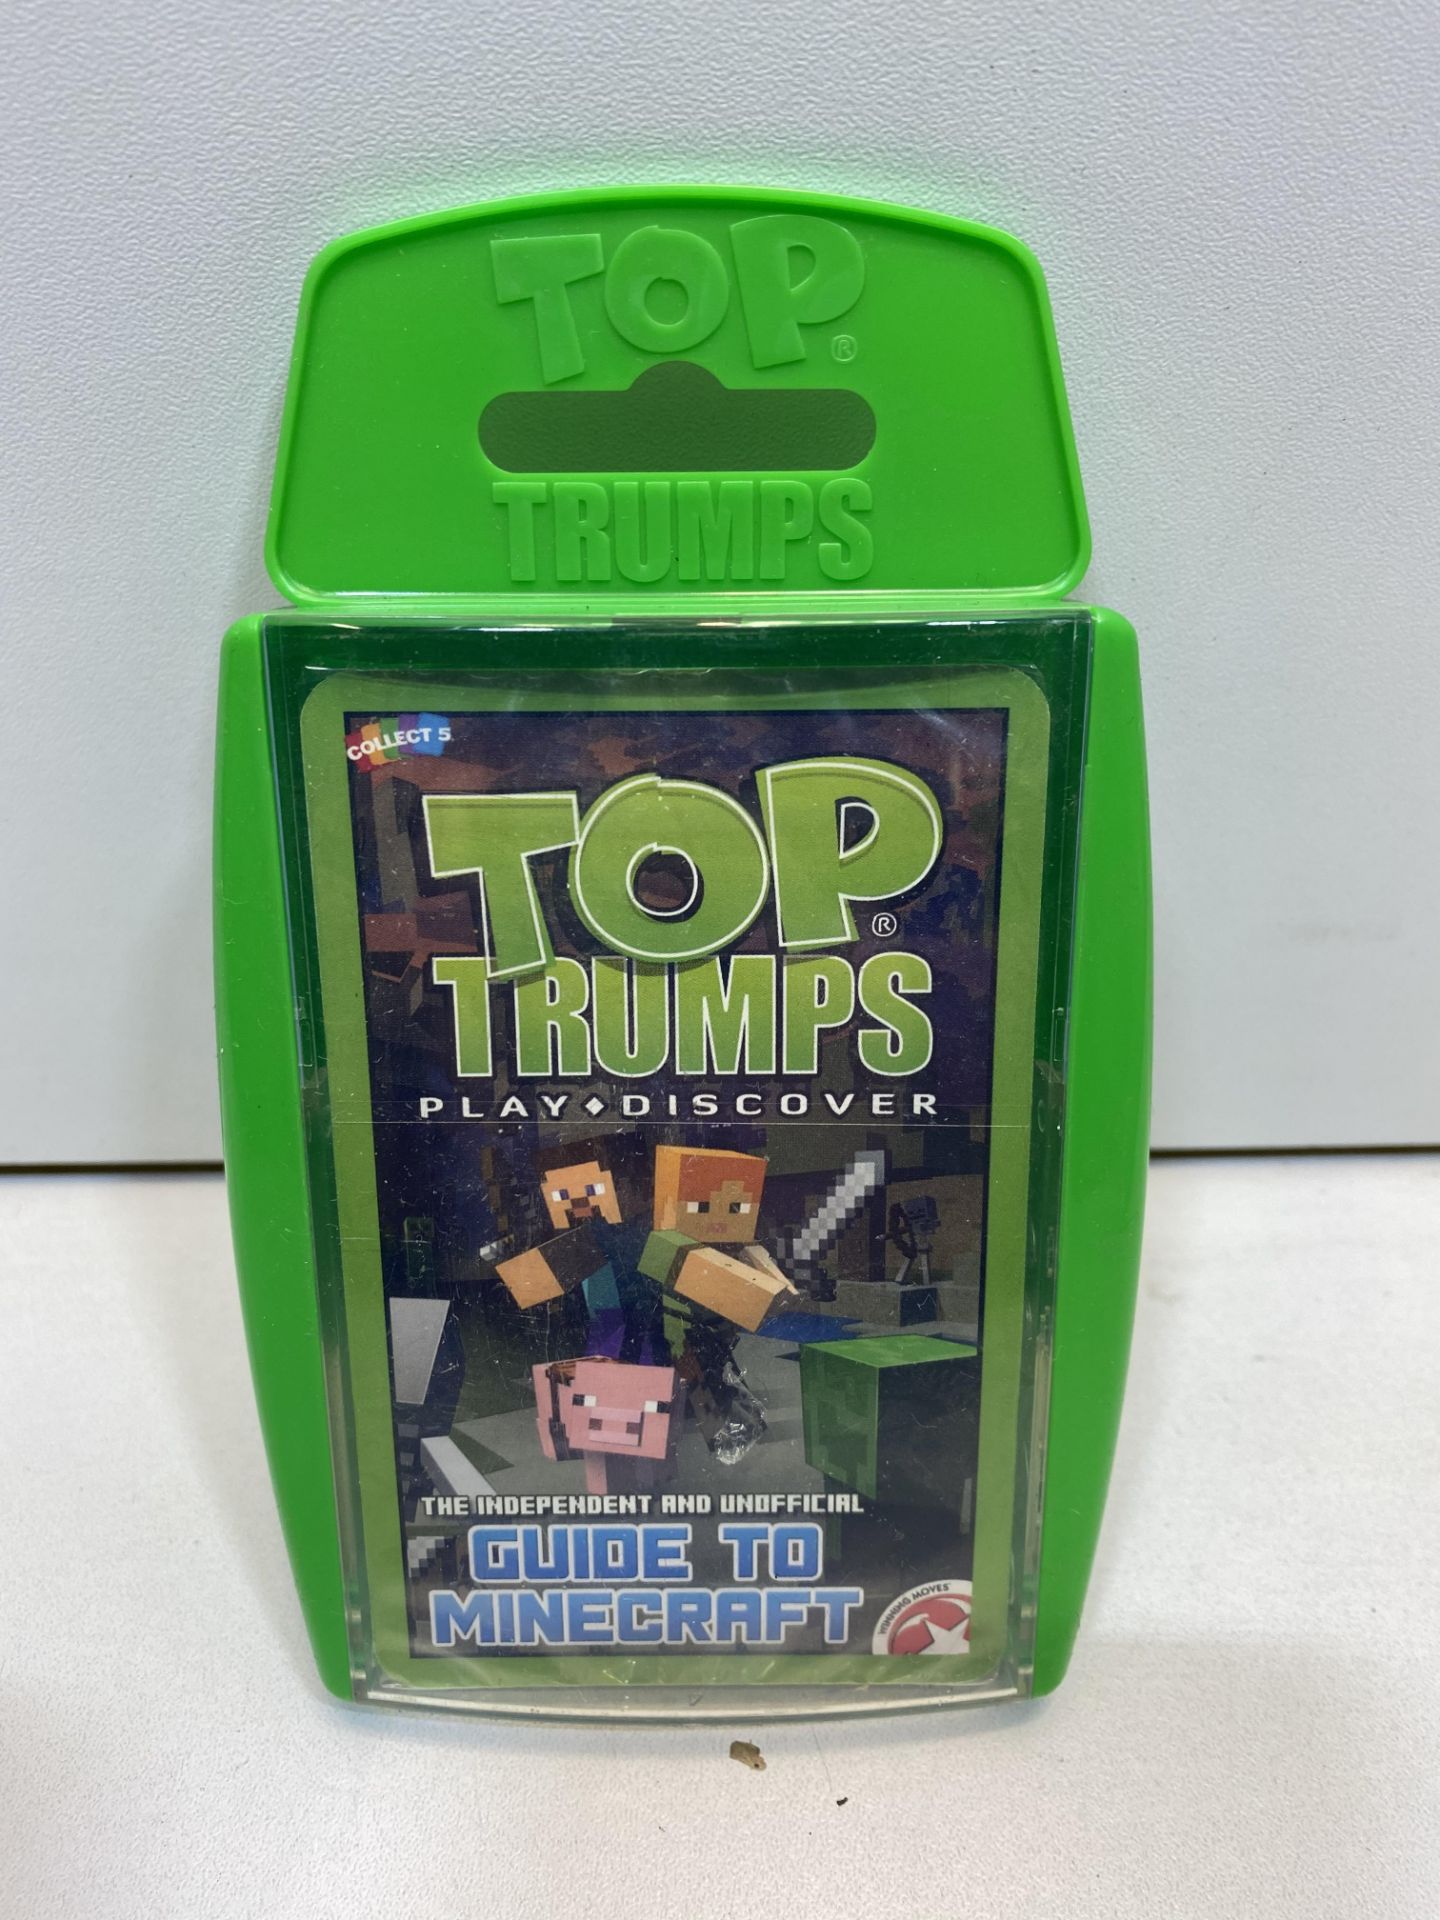 30 x Top Trumps 037310 The Unofficial and Independent Guide to Minecraft Card Game, Green |503690503 - Image 6 of 7